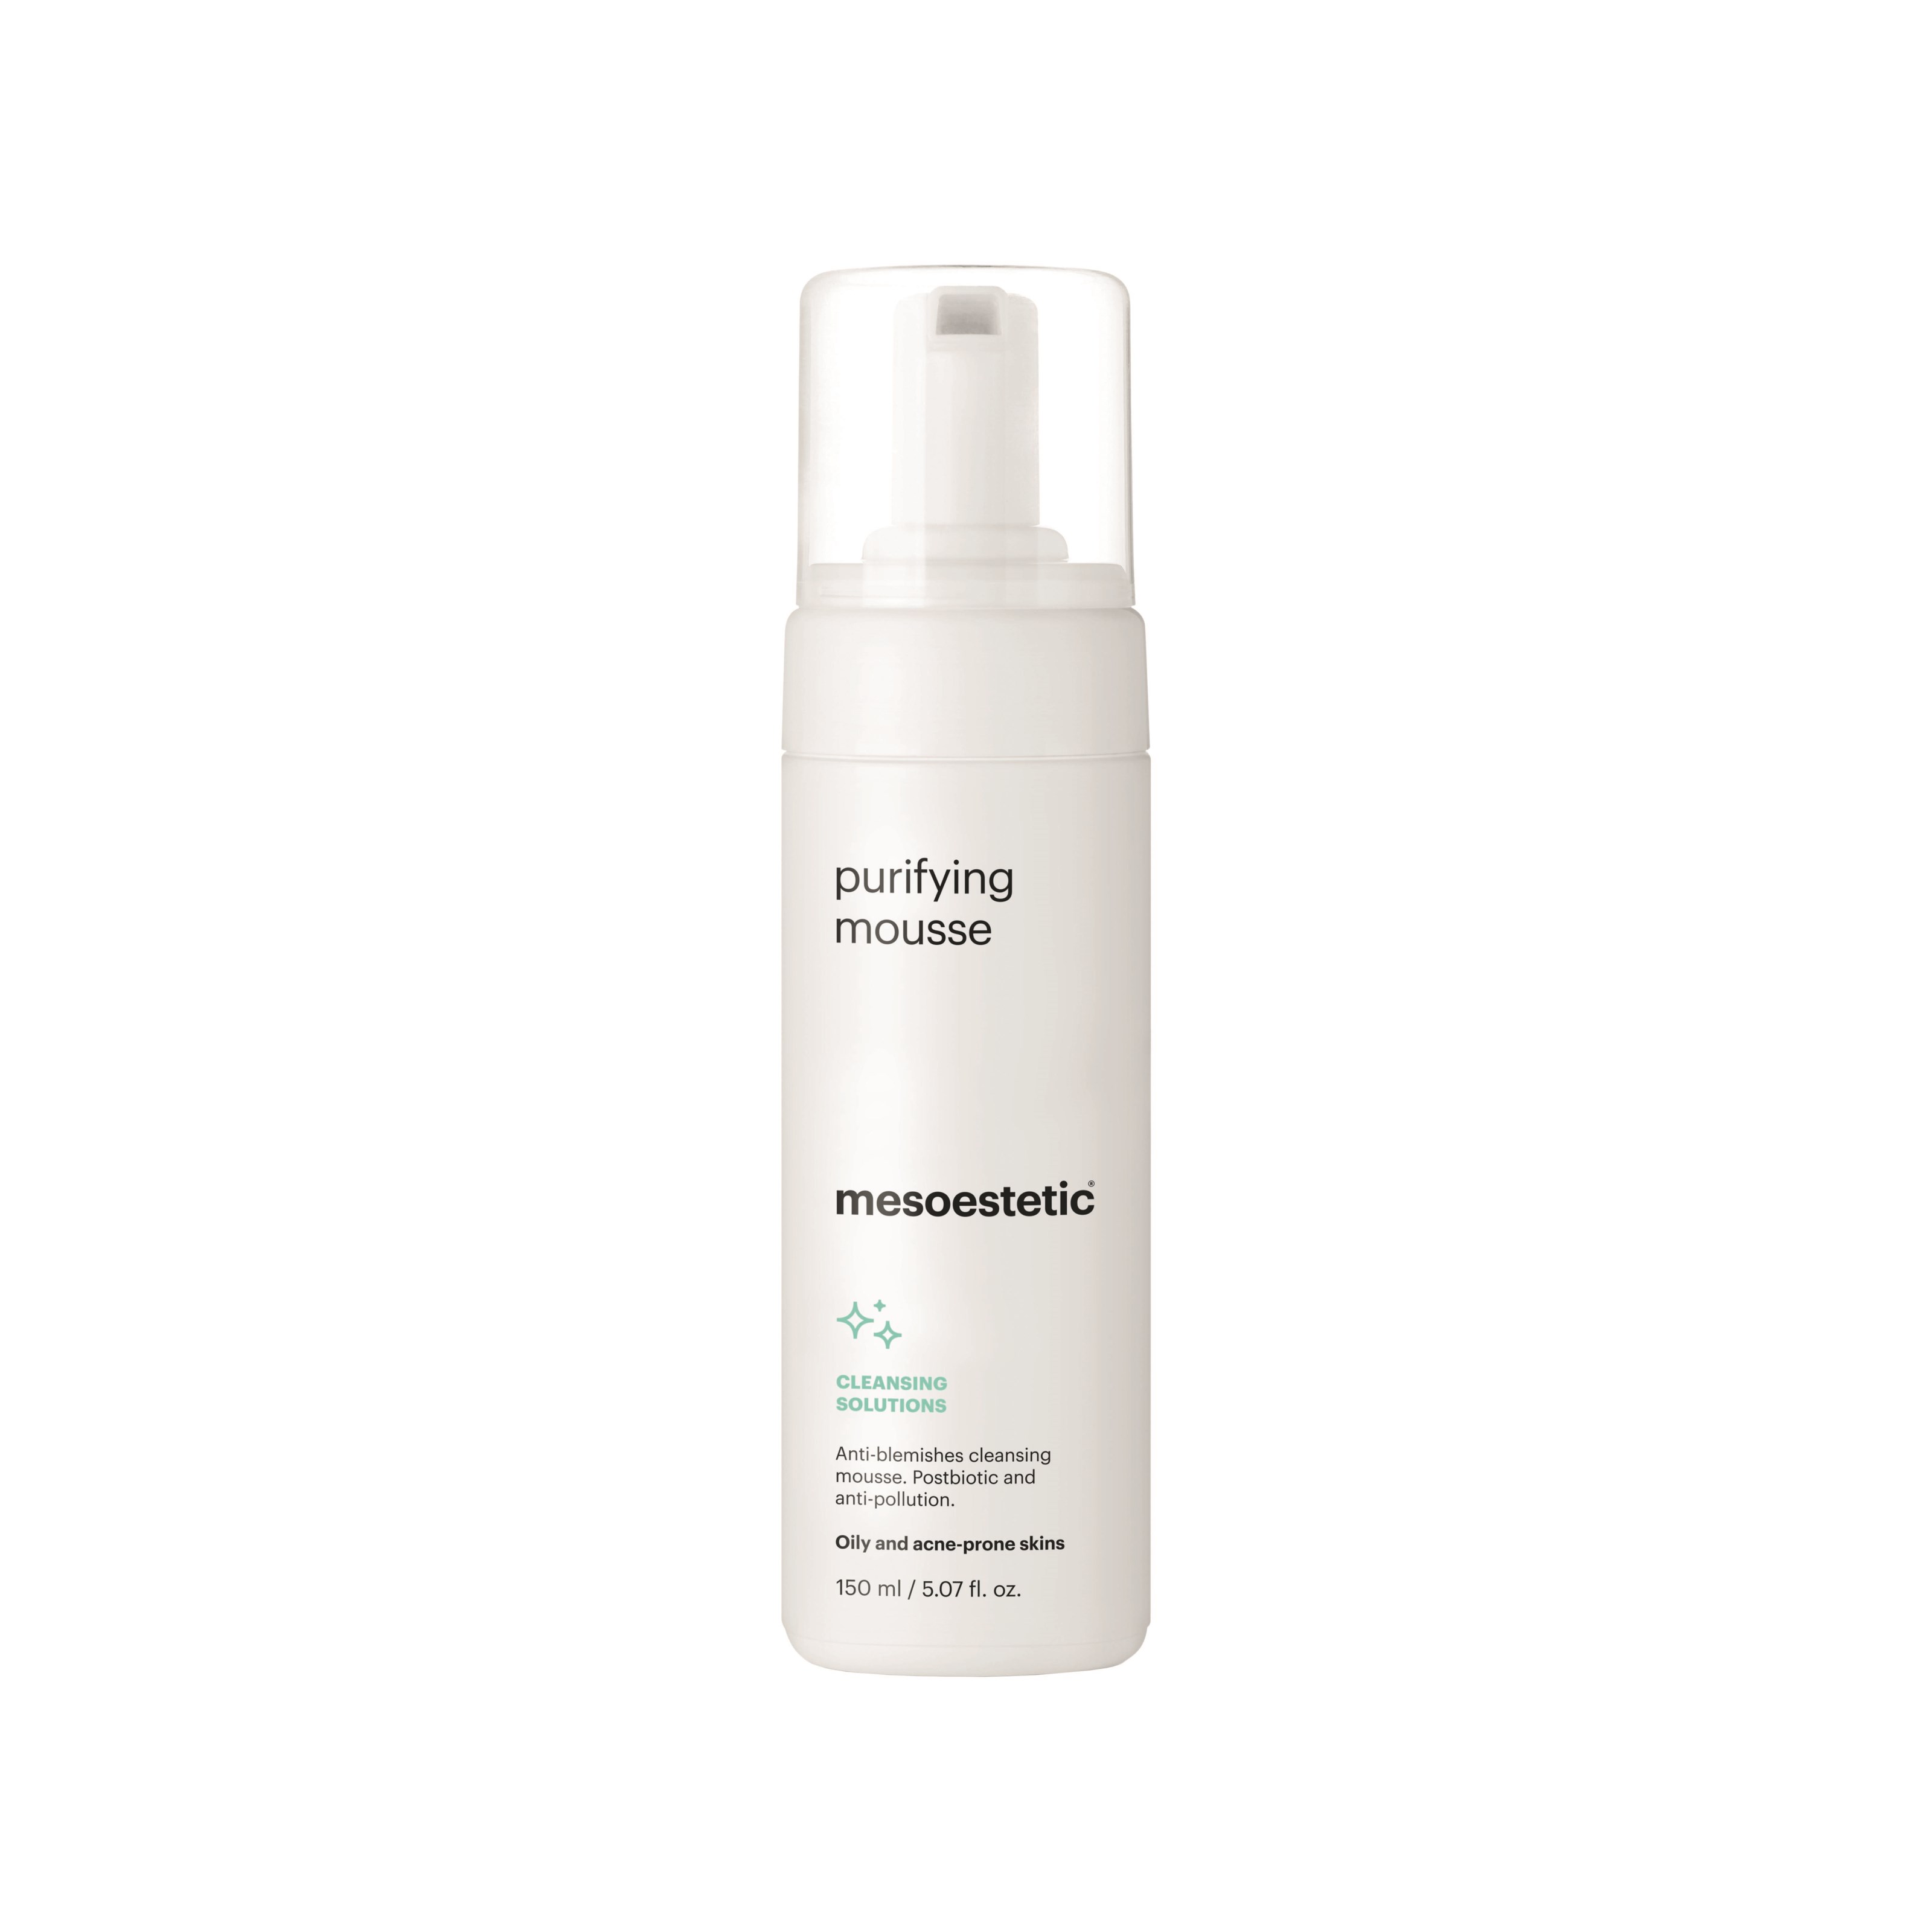 Mesoestetic Cleansing Solutions Purifying Mousse 150 ml